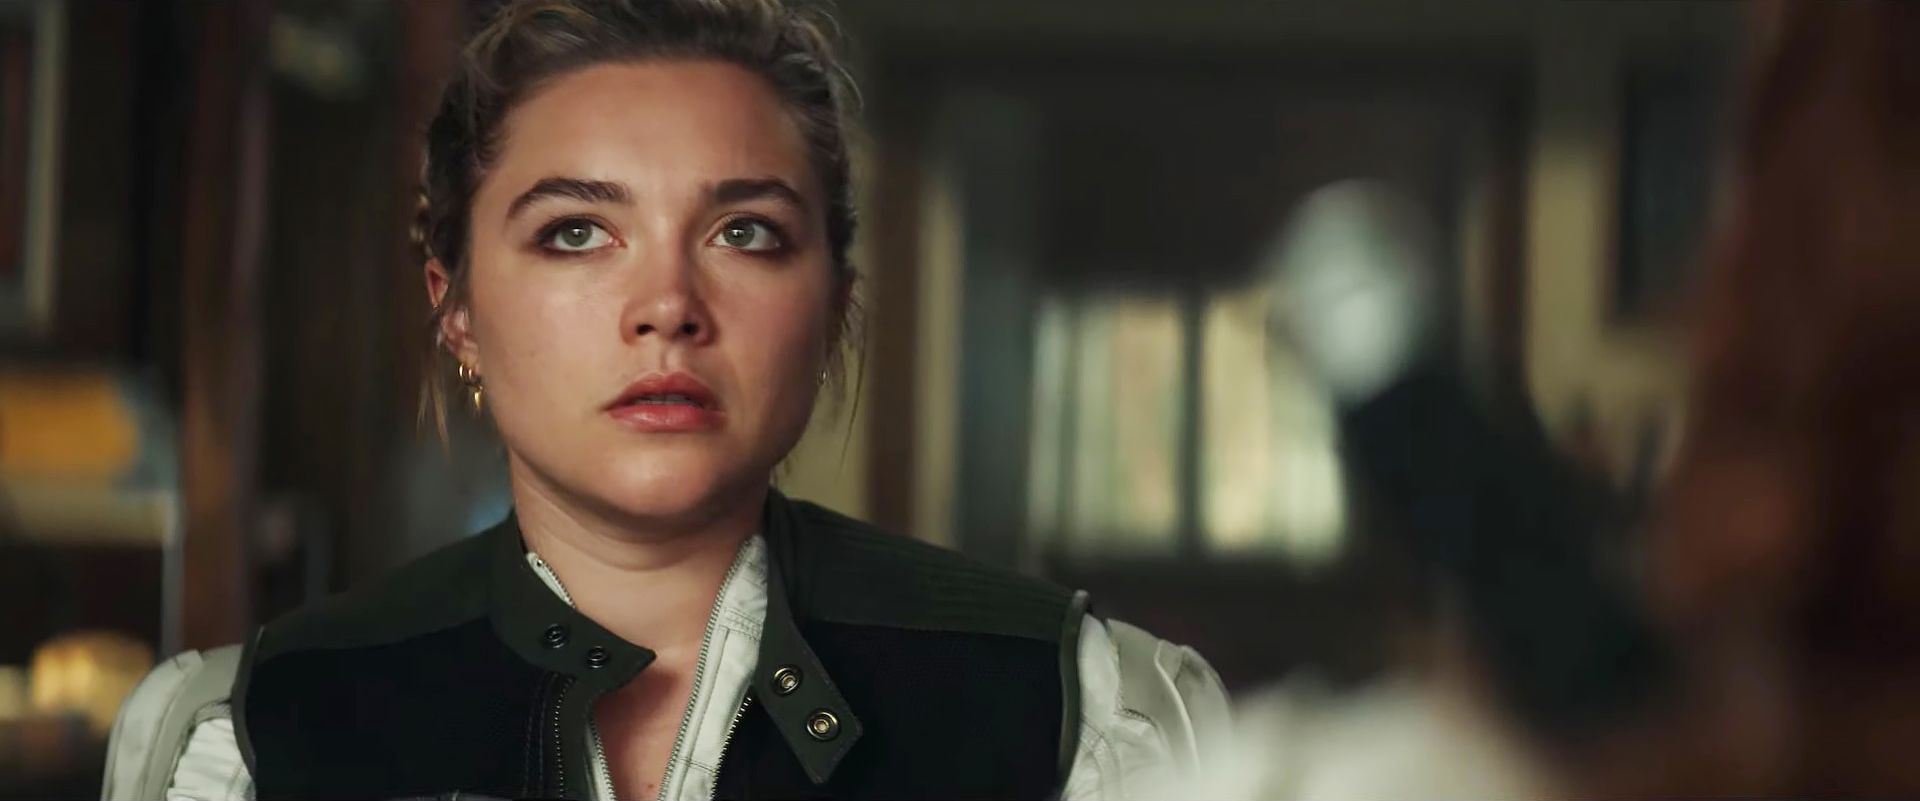 Would you guys watch a Black Widow sequel with Florence Pugh